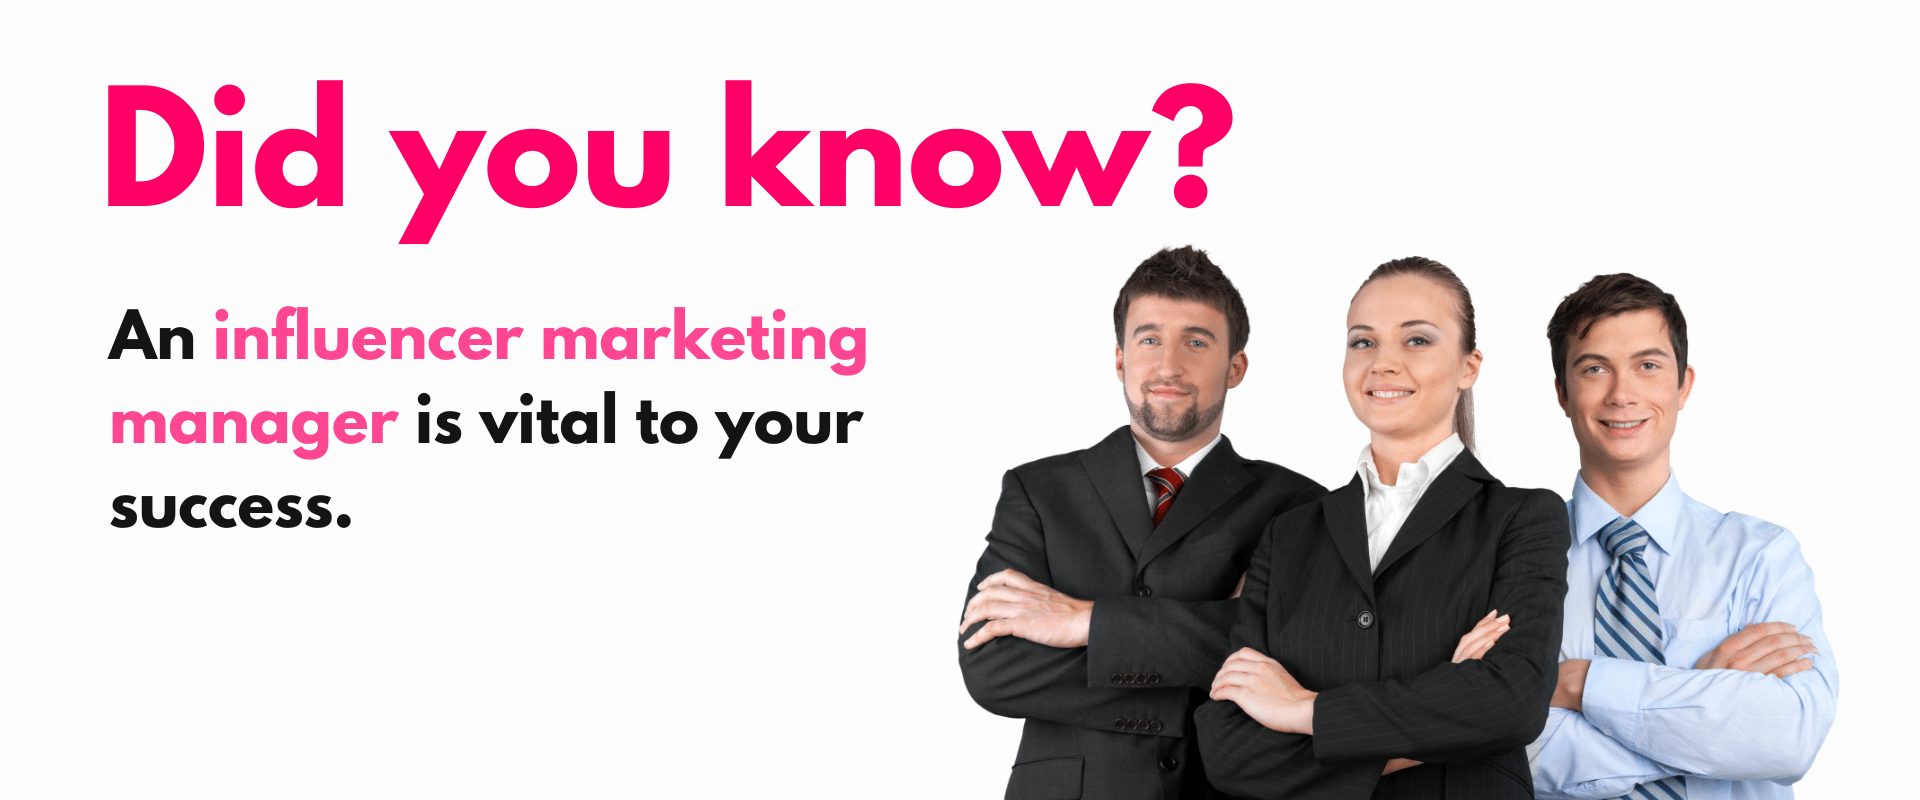 Influencer marketing manager: An image of a group of people with the words did you know? an influence marketing manager is to your success.